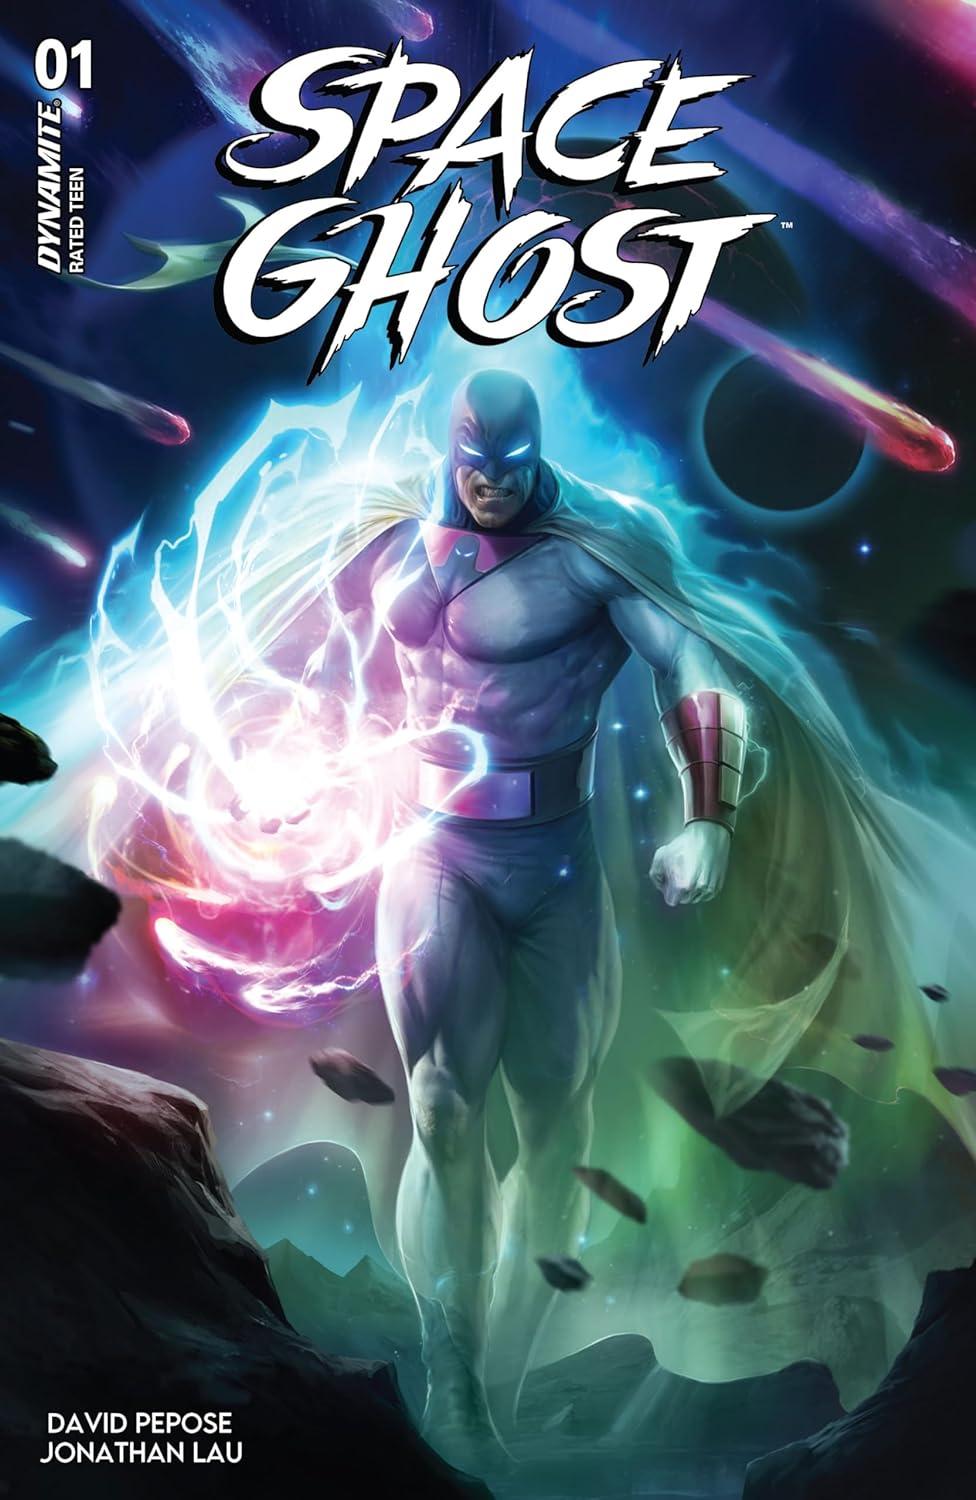 Space Ghost #1 cover art